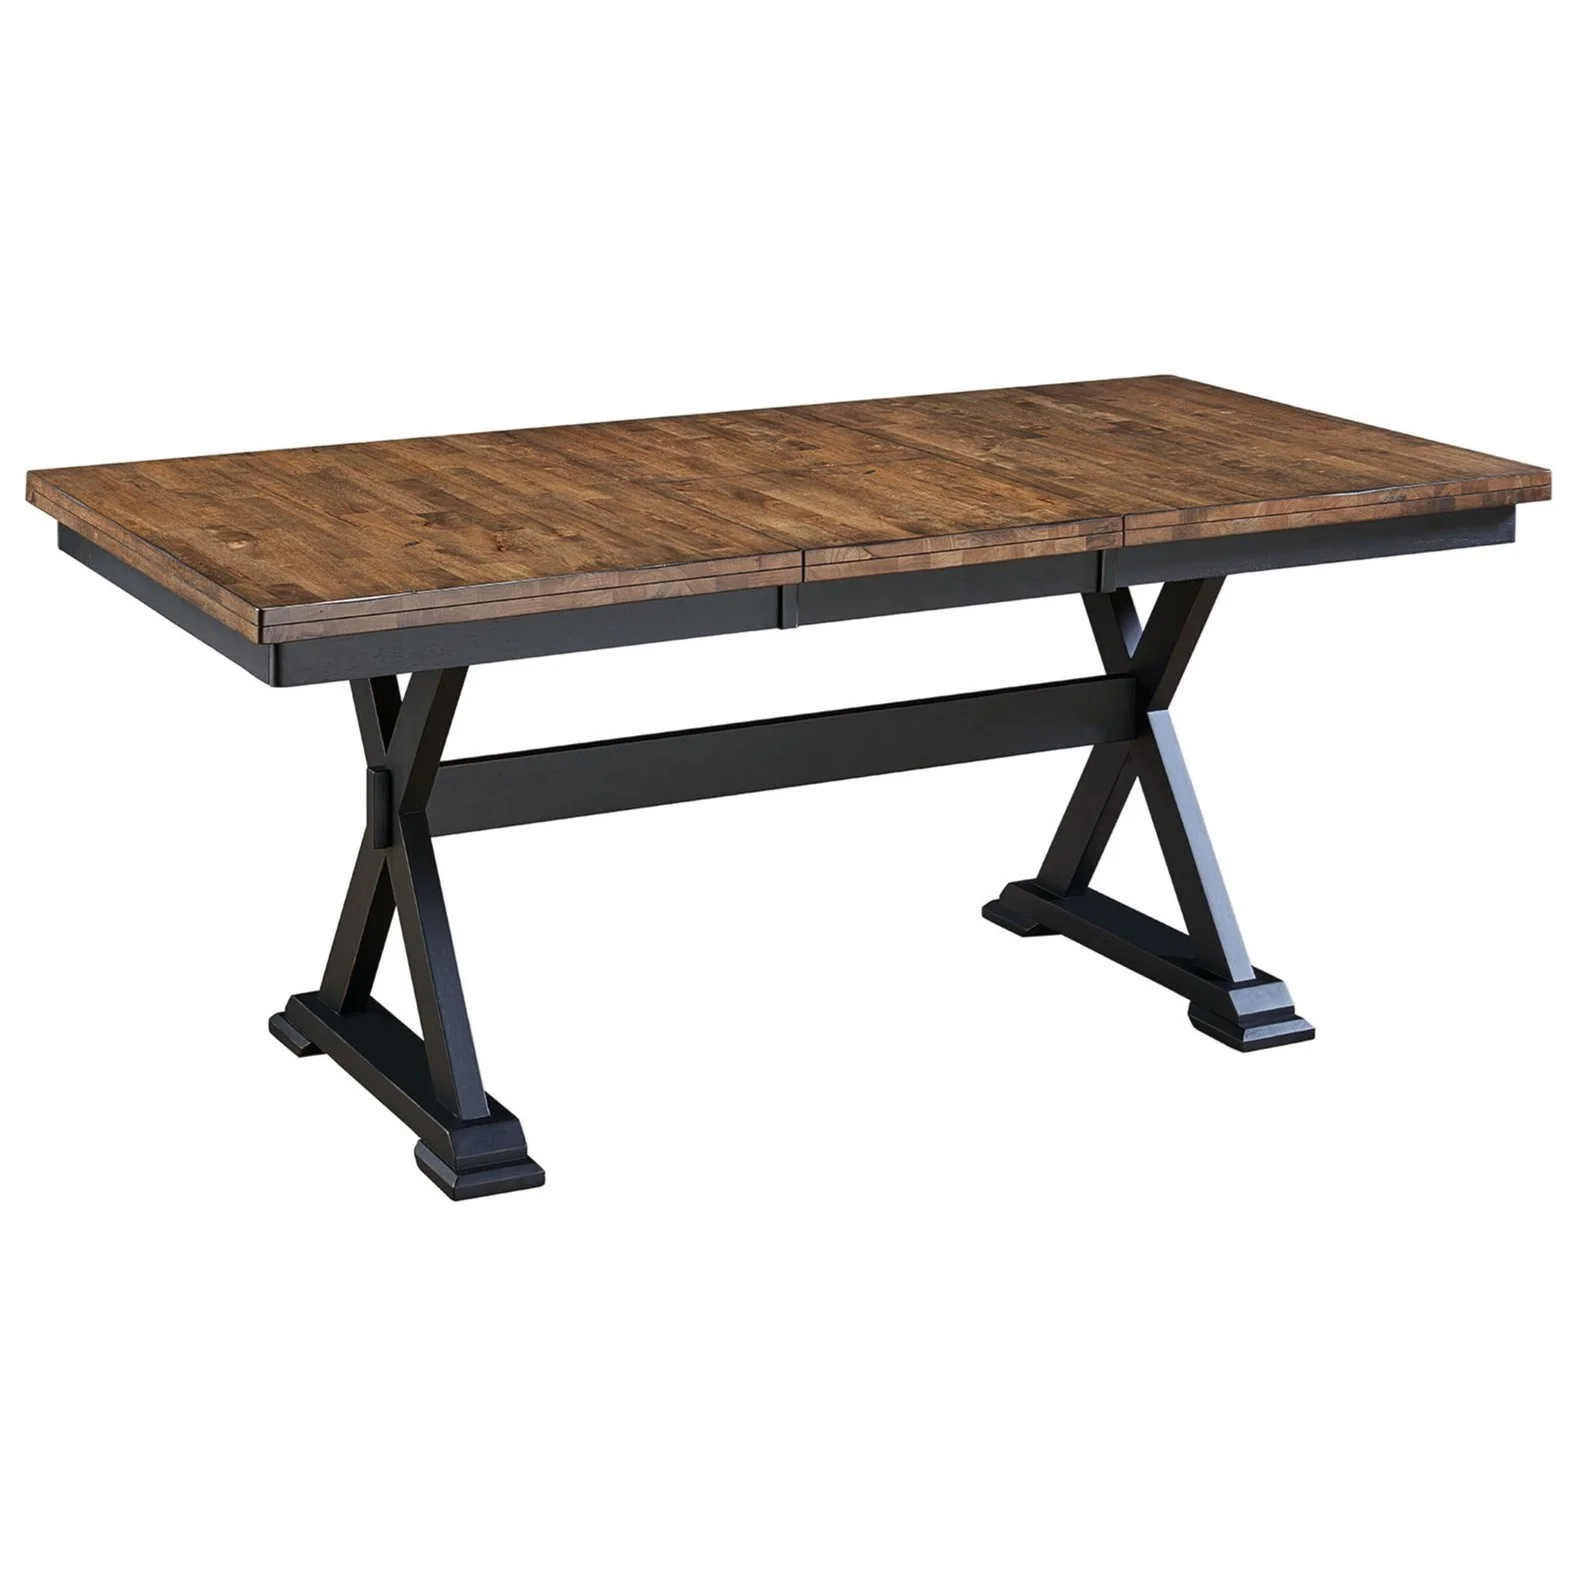 Yellowstone Dutton Trestle Dining Table - 6 Foot, Black Forest Decor